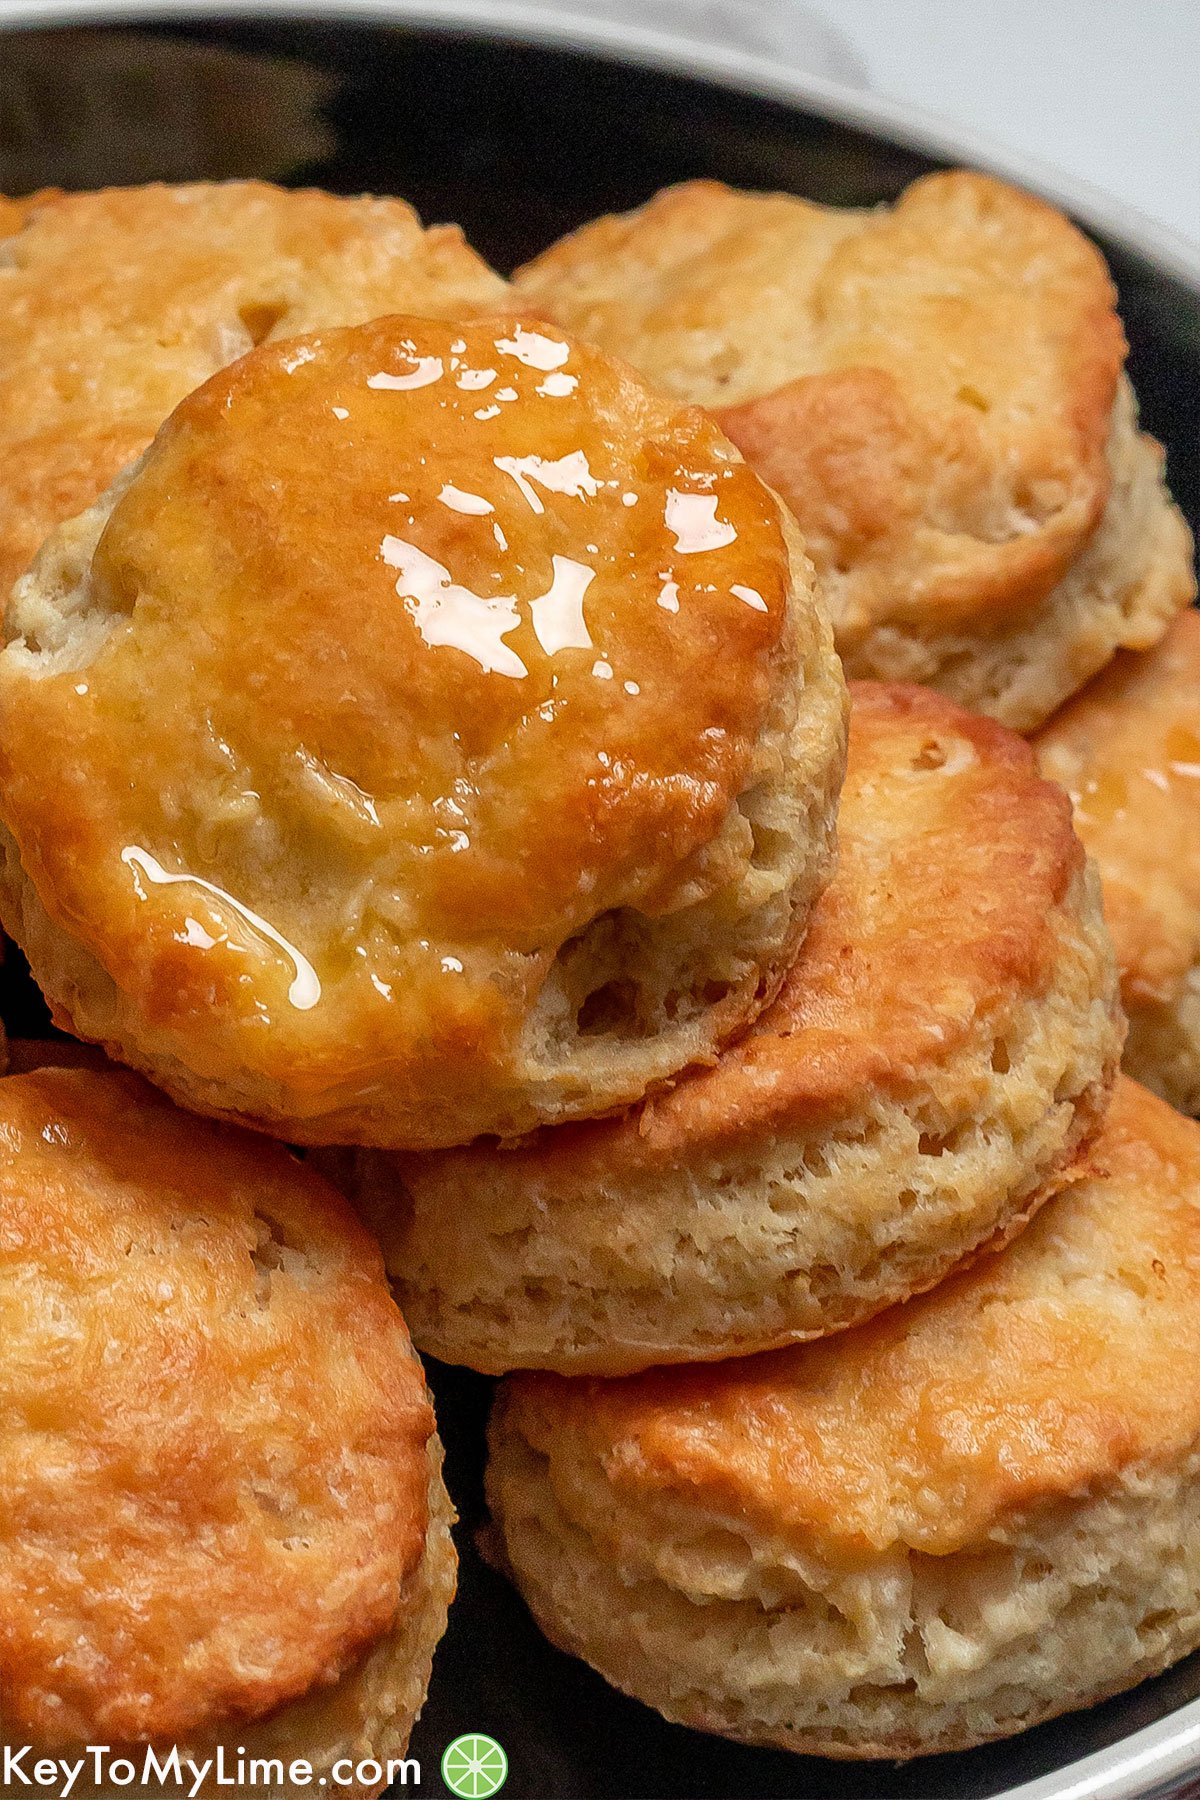 A close up photo of flakey biscuits with melted butter on top.